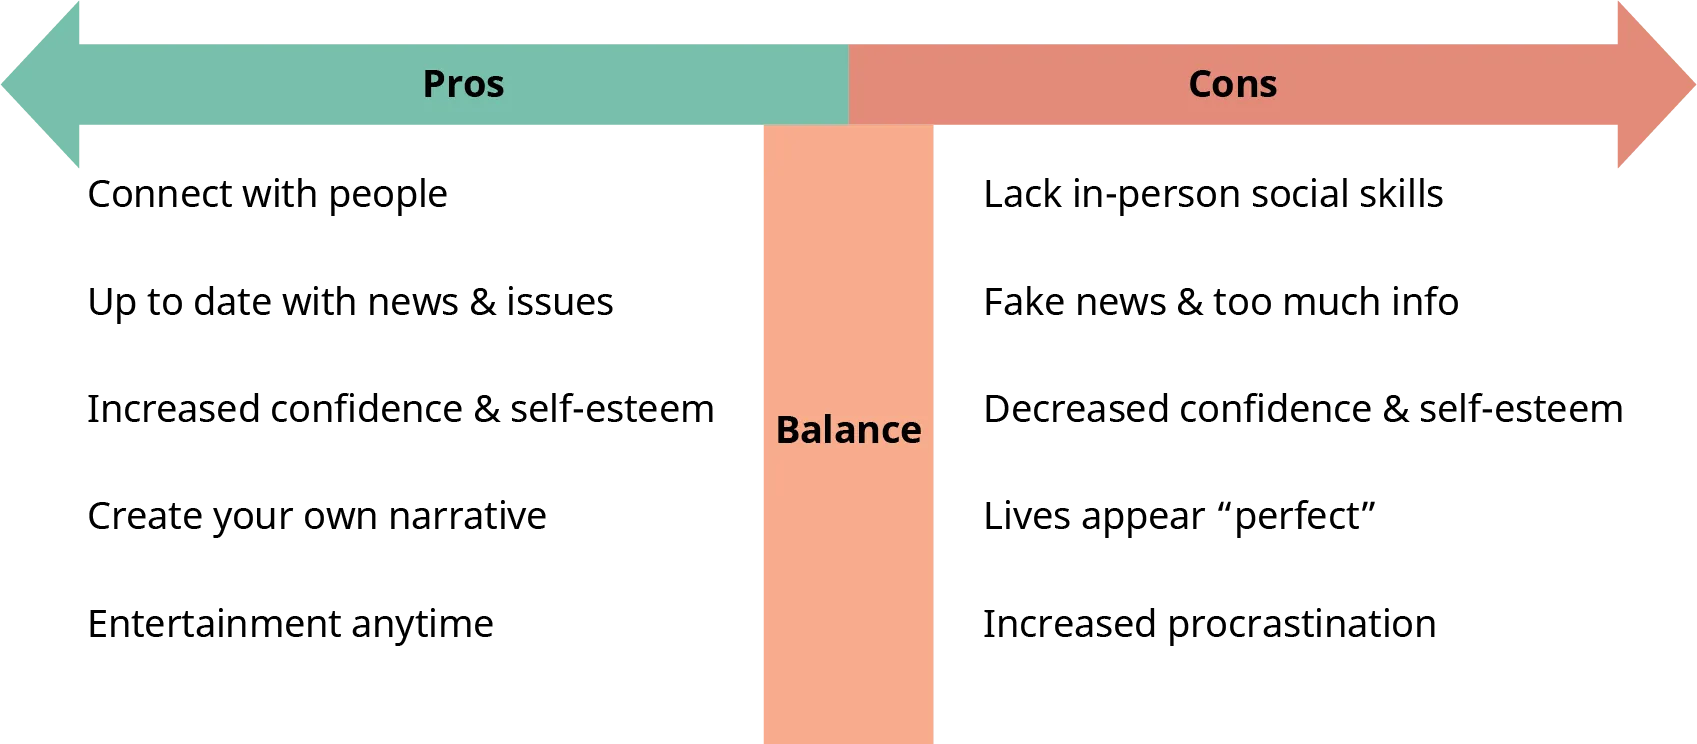 A diagram is set up like the letter T or a scale with the center labeled “Balance.” The left side of the diagram is labeled “Pros” and the right side is labeled “Cons.” The left side lists the pros of social media: to connect with people, keep up-to-date with news and issues, to have increased confidence and self-esteem, create your own narrative, and to find entertainment. The right side lists the cons of social media: the lack of developing in-person social skills, fake news, possible decreased confidence and self-esteem, others' lives appearing perfect, and the possible tendency toward increased procrastination.